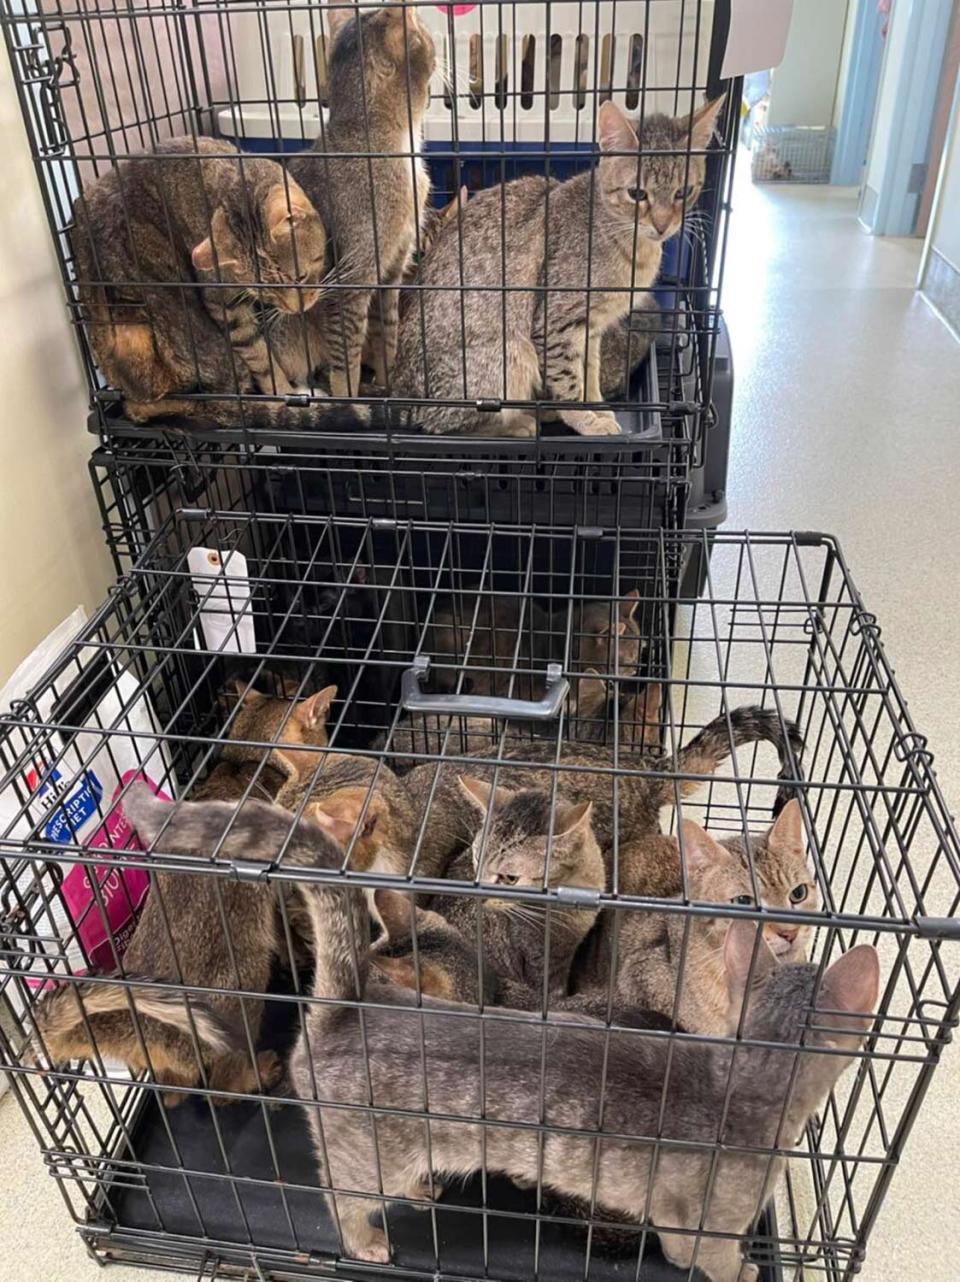 Police Find a Dead Couple in Hoarder House with 150 Cats